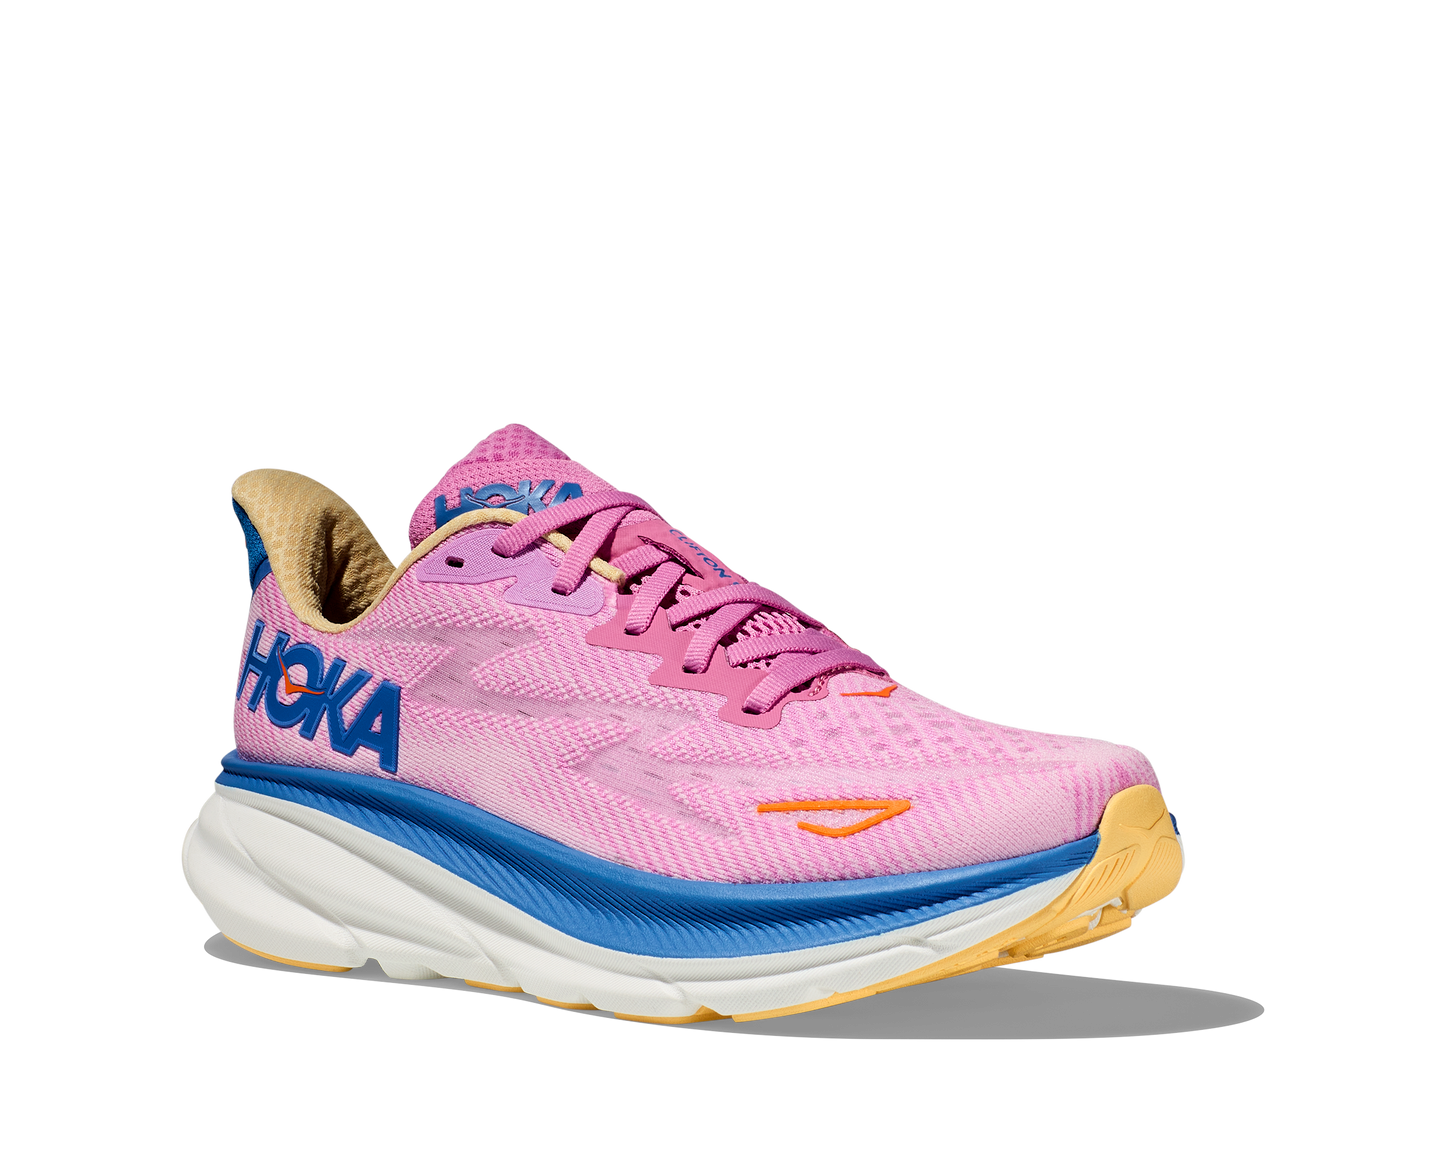 Hoka running shoe for Women. Clifton 9 is pink with blue details.